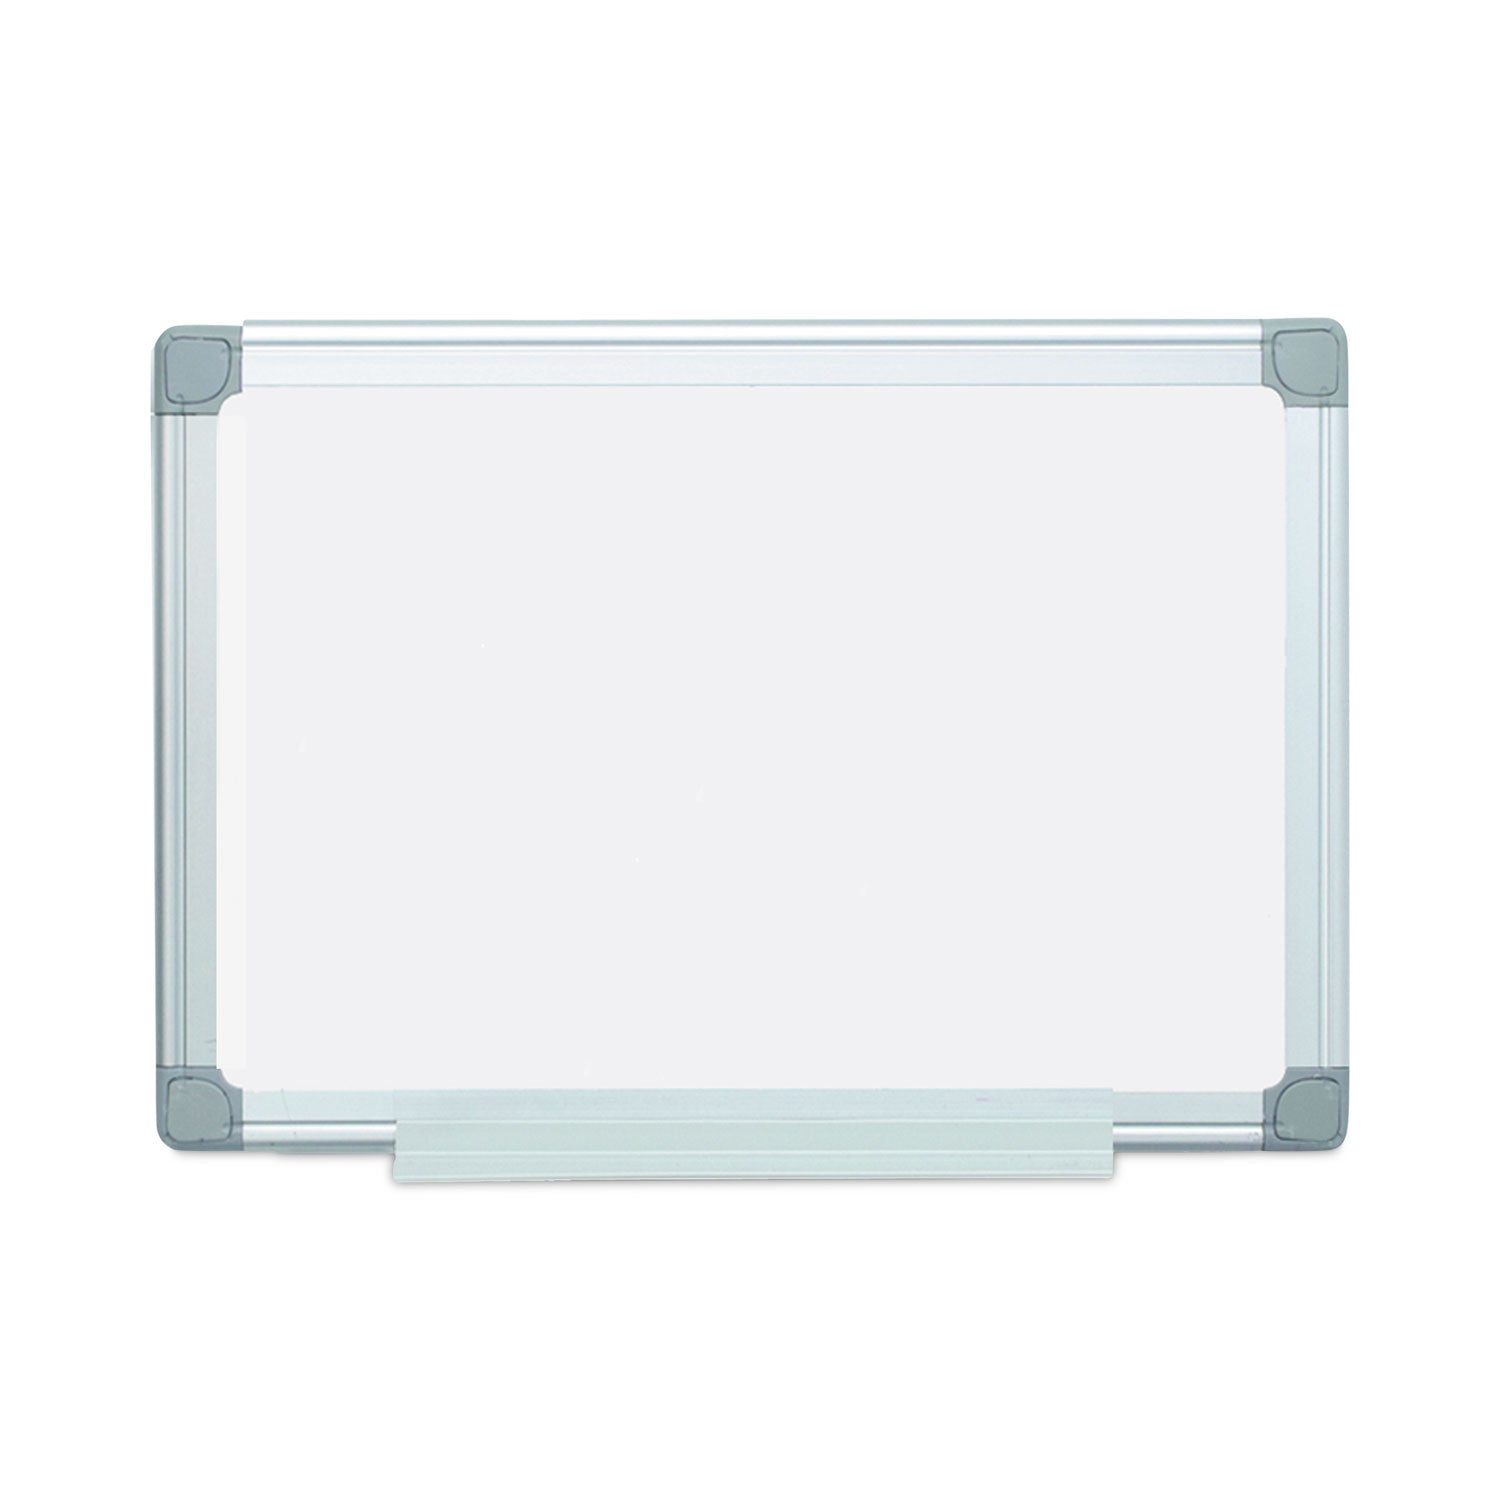 Earth Silver Easy-Clean Dry Erase Board, Reversible, 24 x 18, White Surface, Silver Aluminum Frame - 